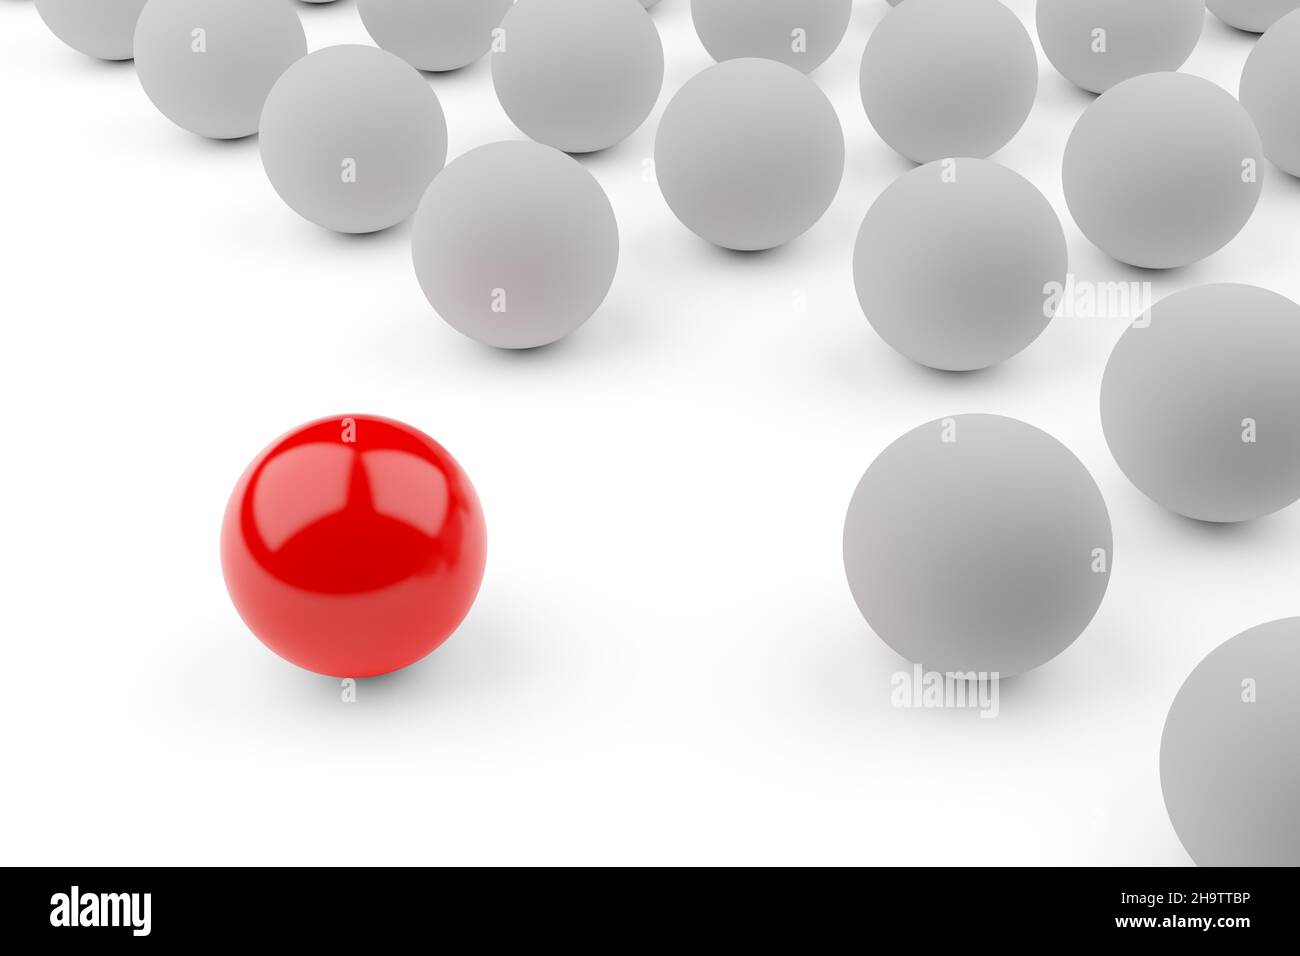 Single red ball standing out from the crowd of white spheres, leadership, standing out or bravery concept over white background, 3D illustration Stock Photo